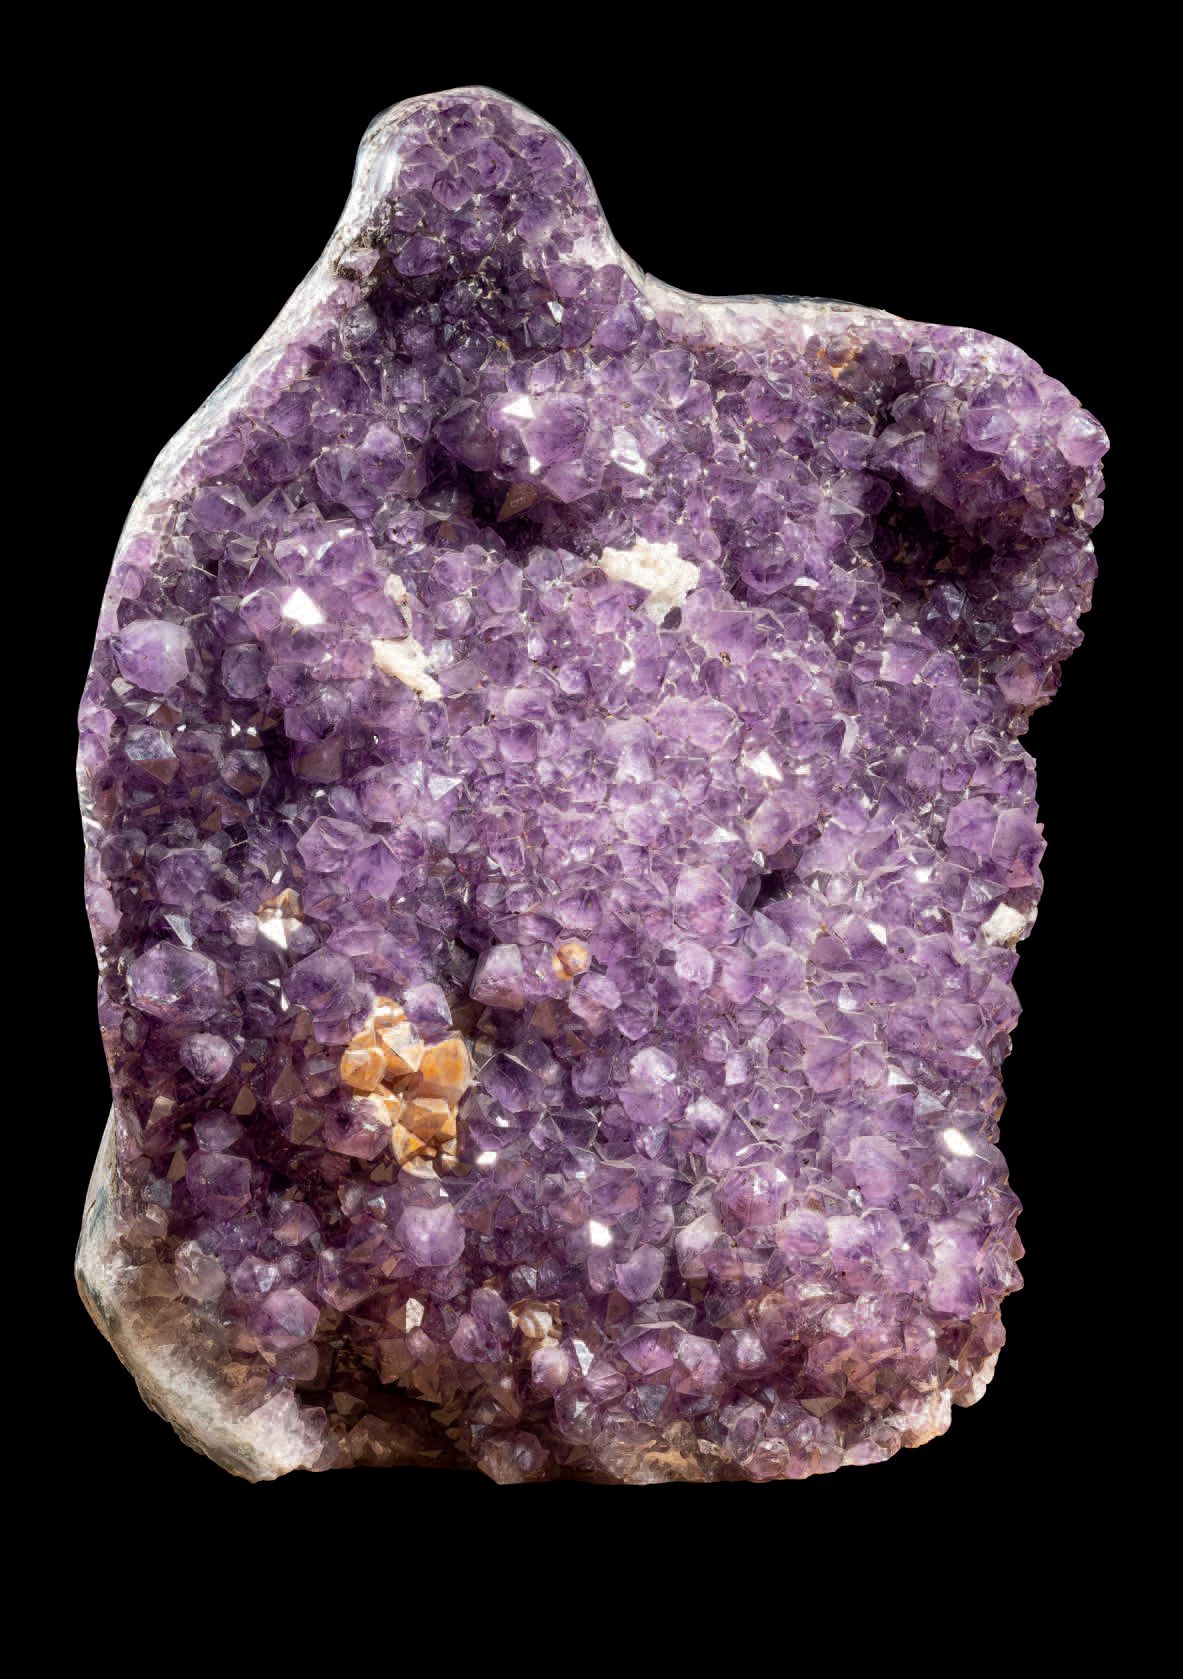 Null Block of amethyst with white calcite crystals.
H. 18 1/2 in - W. 14 9/16 in